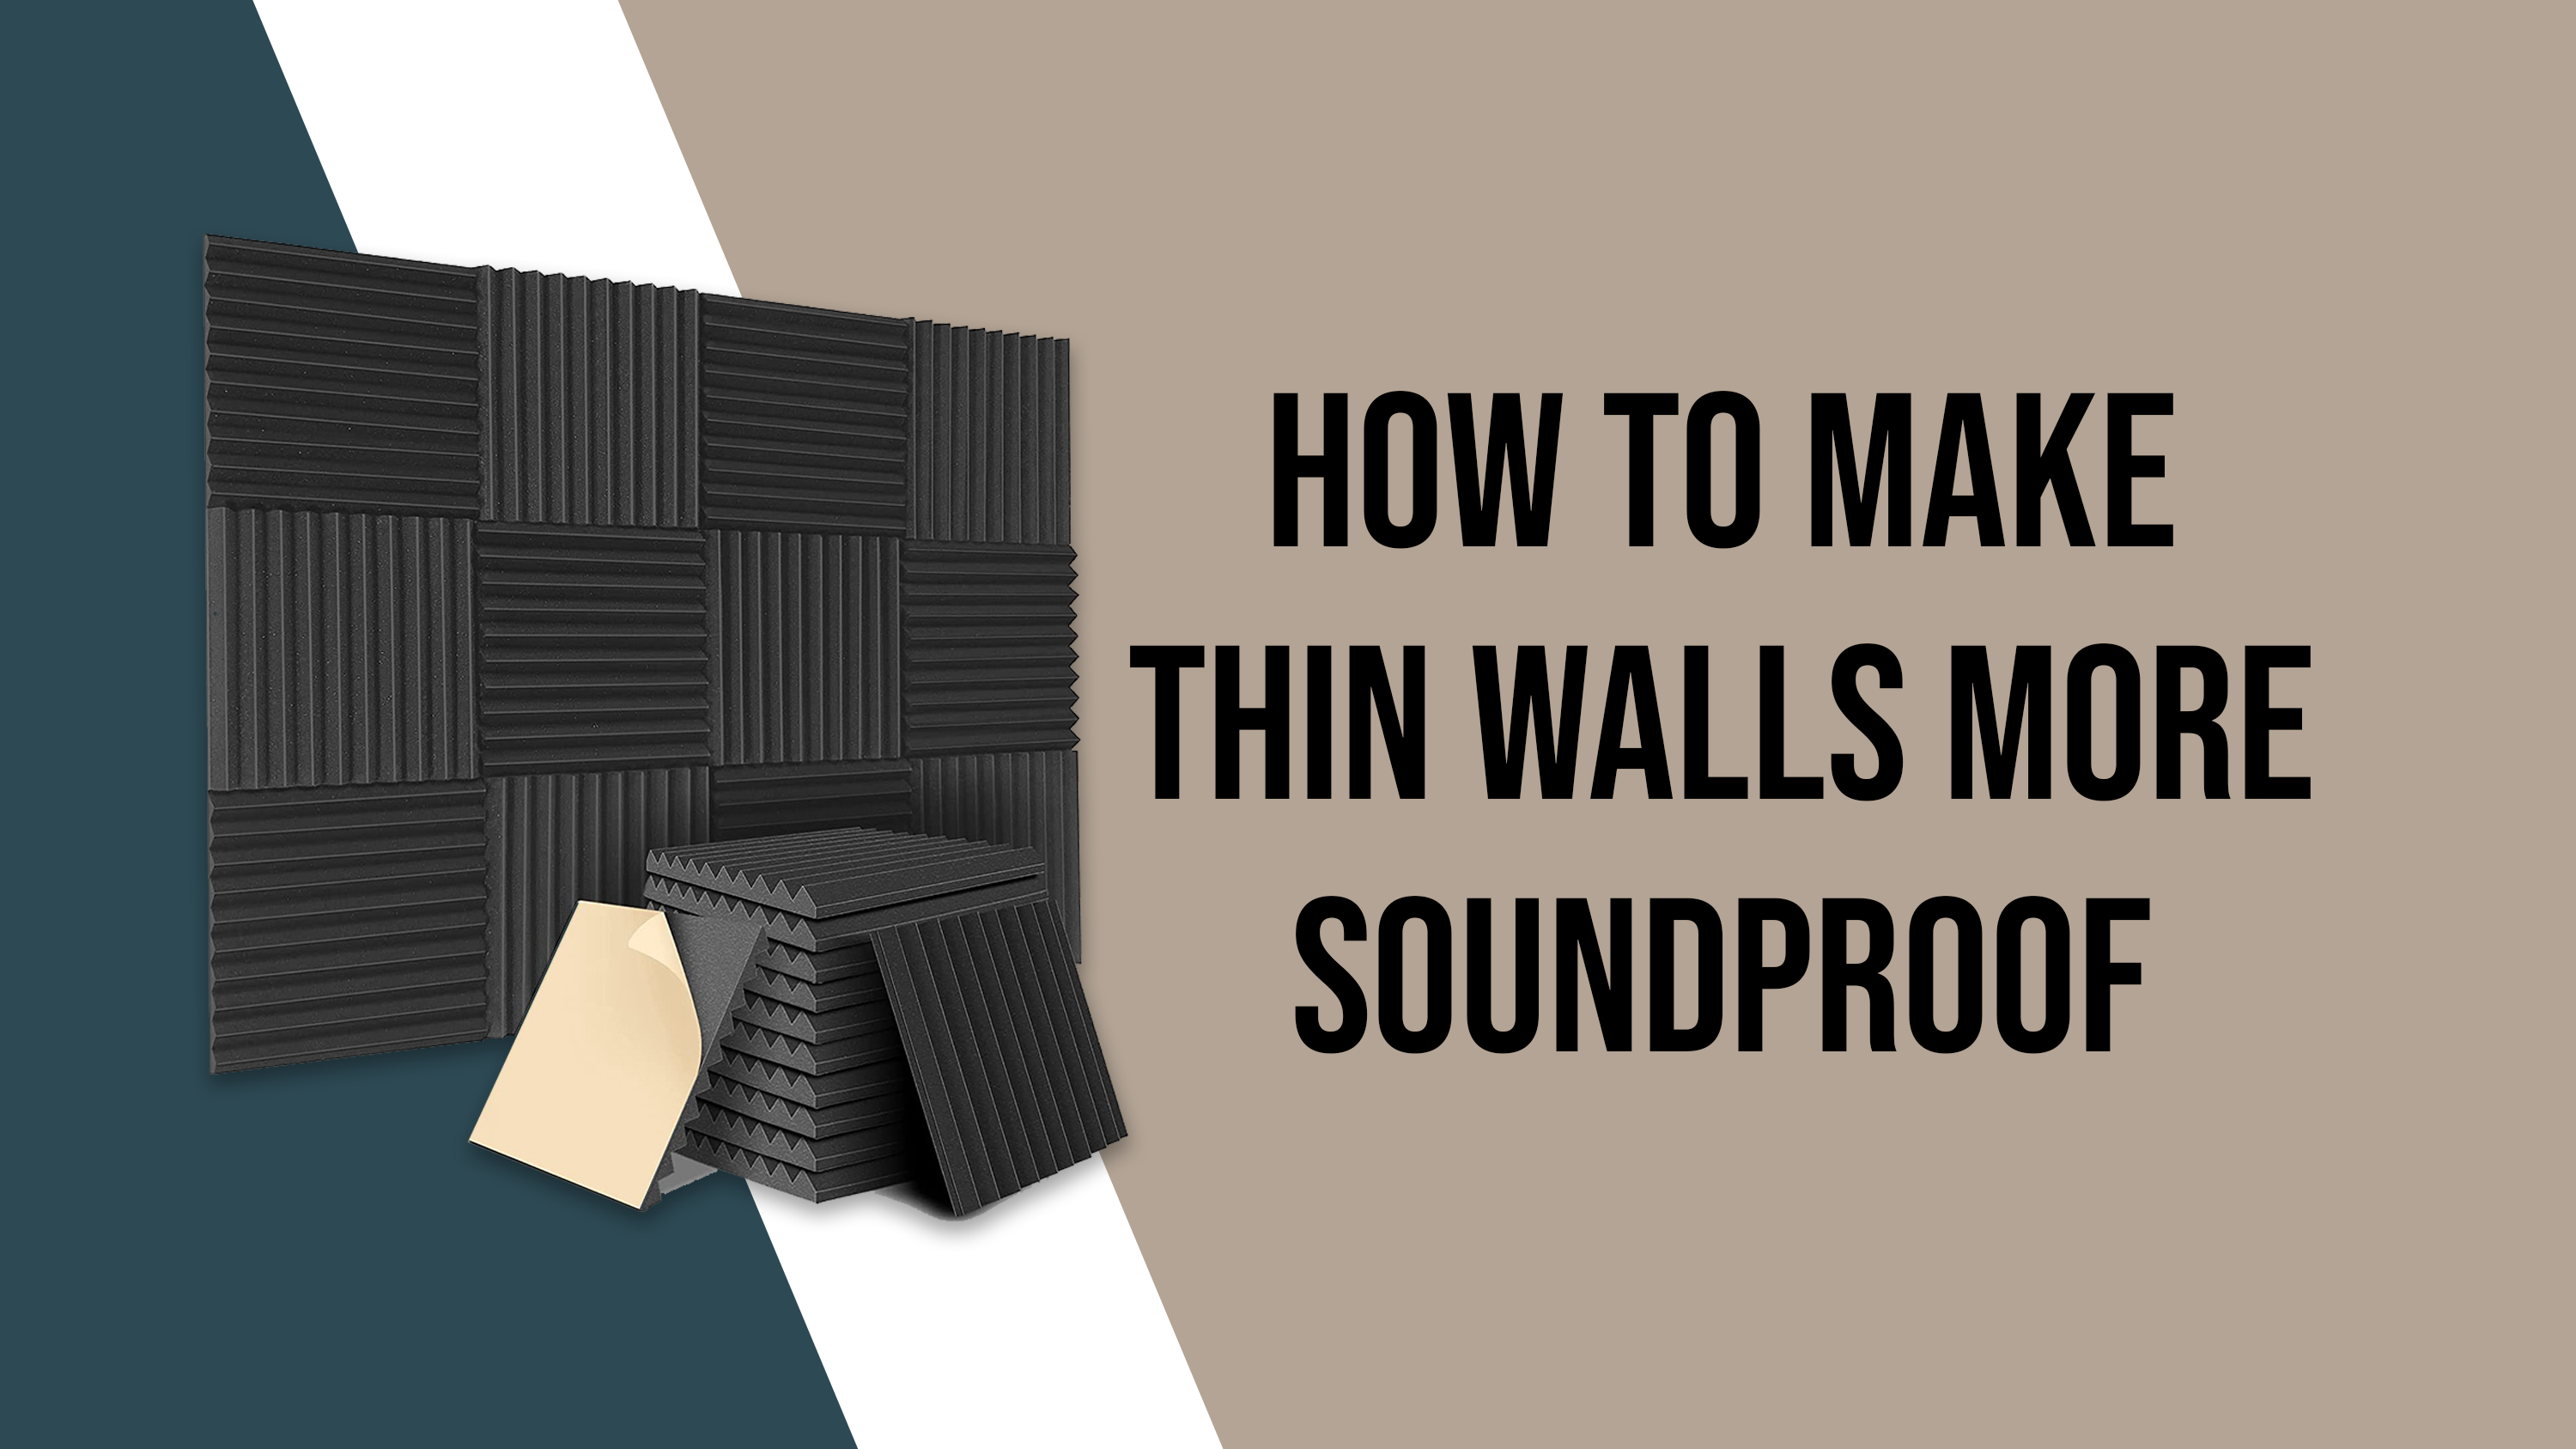 How to make thin walls more soundproof